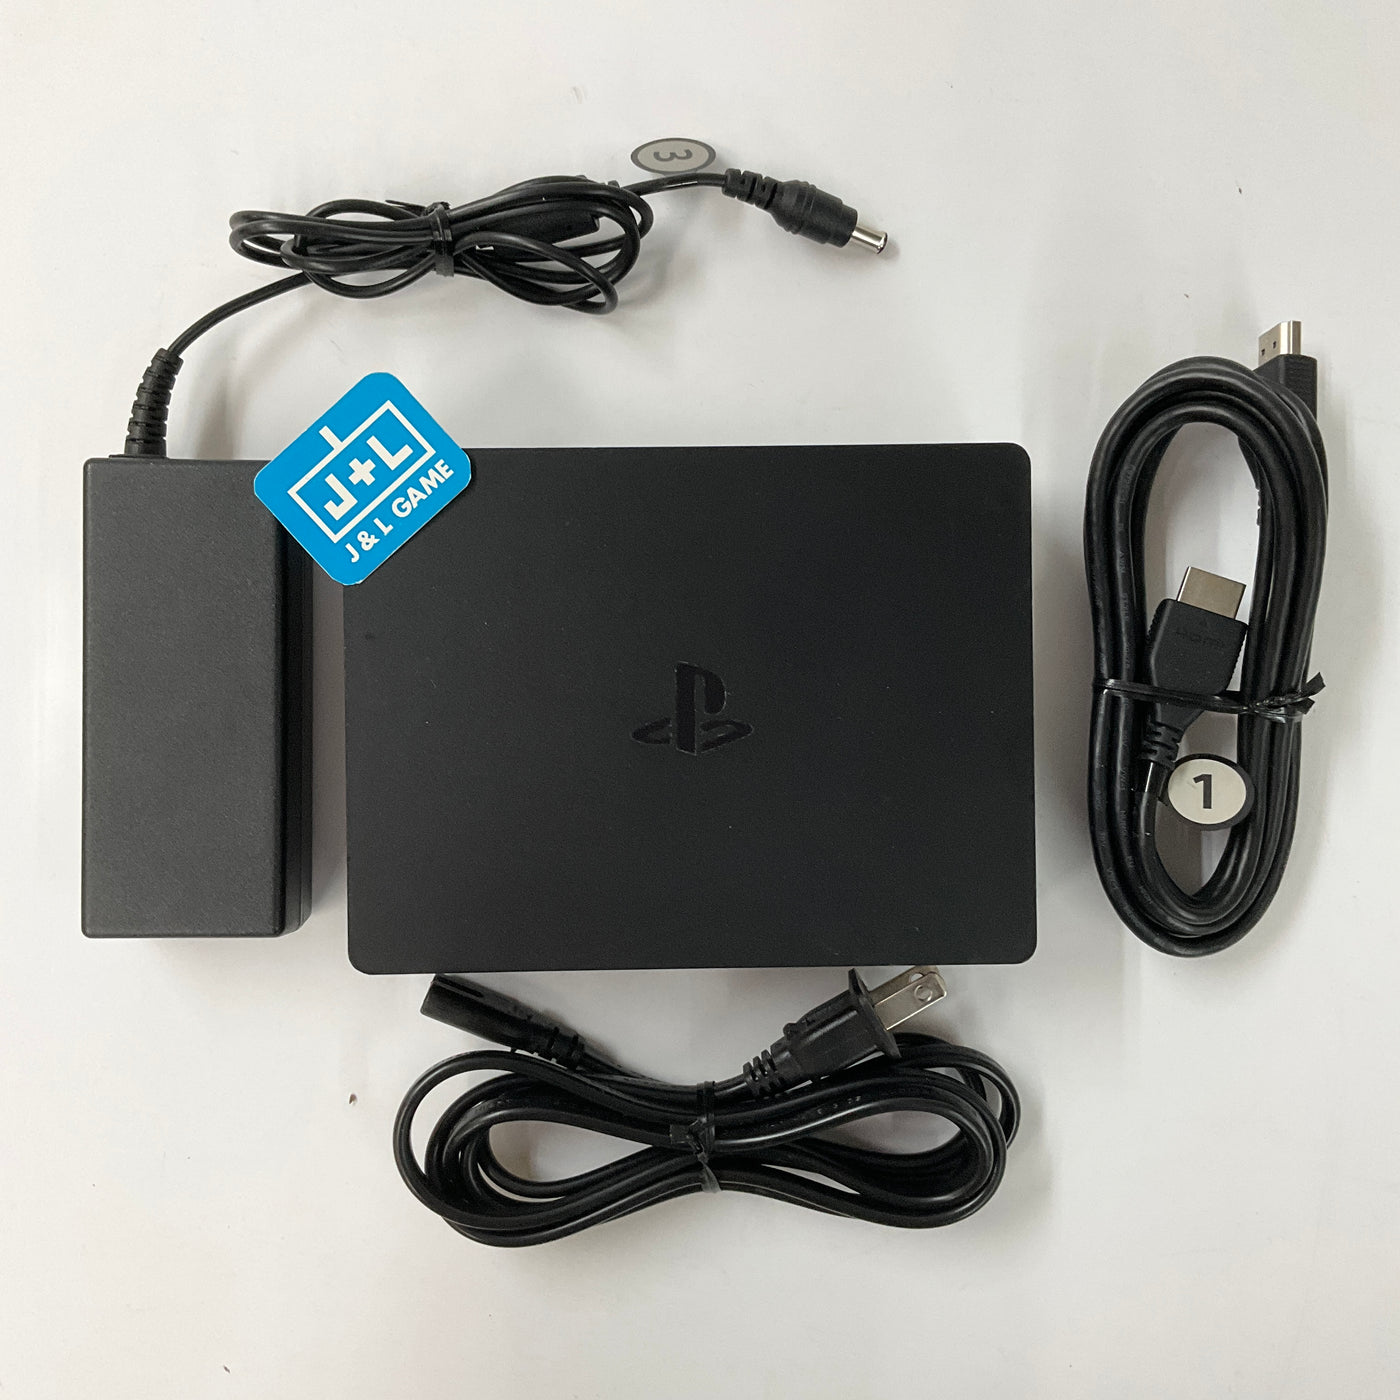 Sony PlayStation VR Processor Unit CUH-ZVR2 with Adapter - (PS4) PlayS